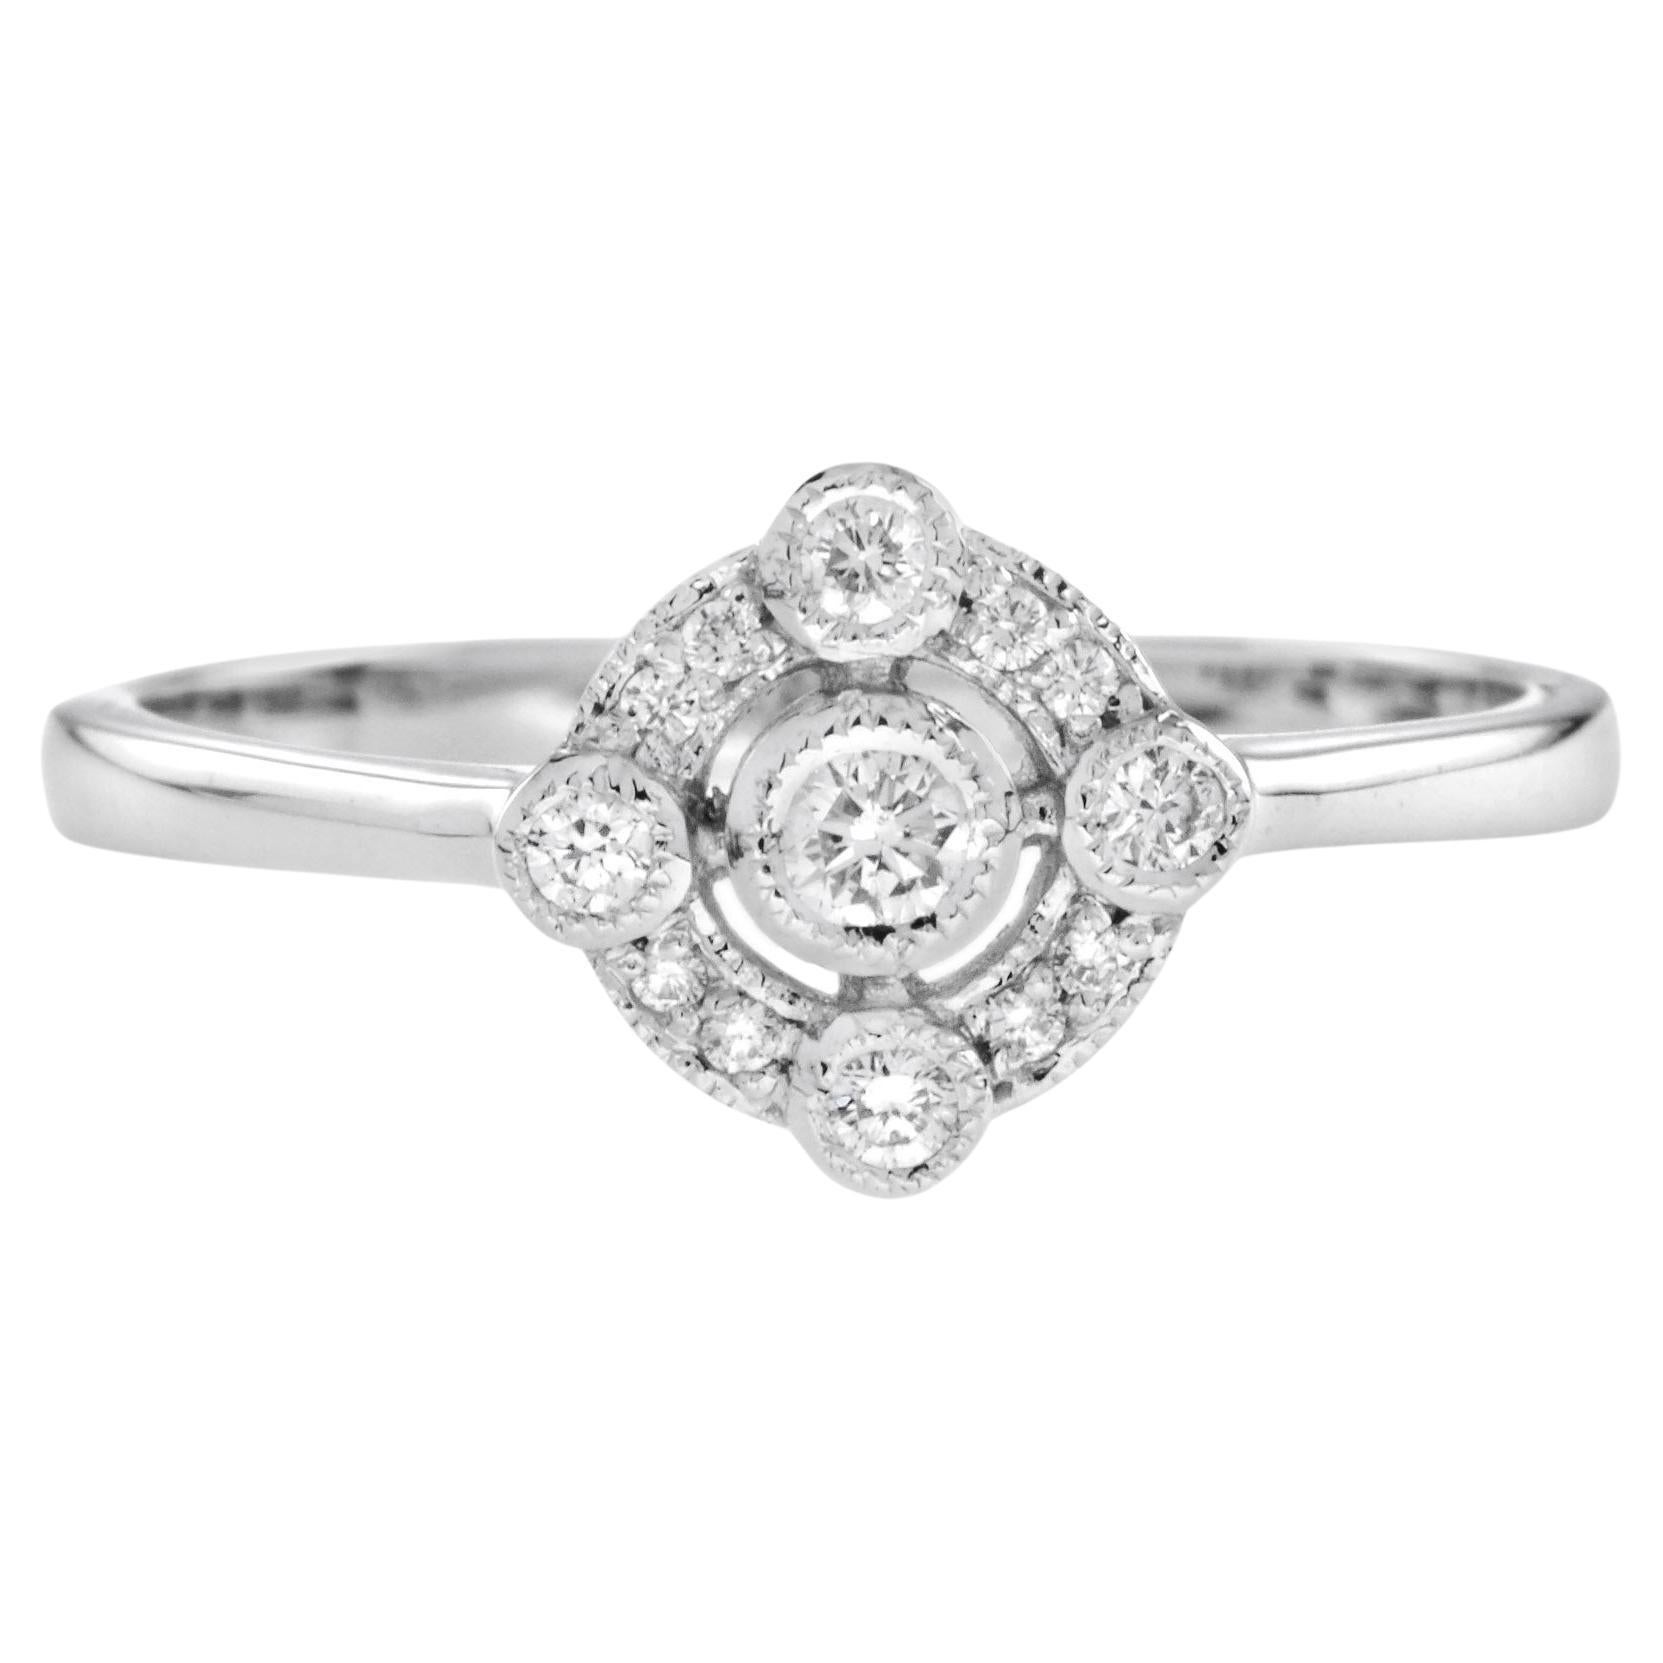 For Sale:  Art Deco Style Diamond Halo Ring in 14K White Gold